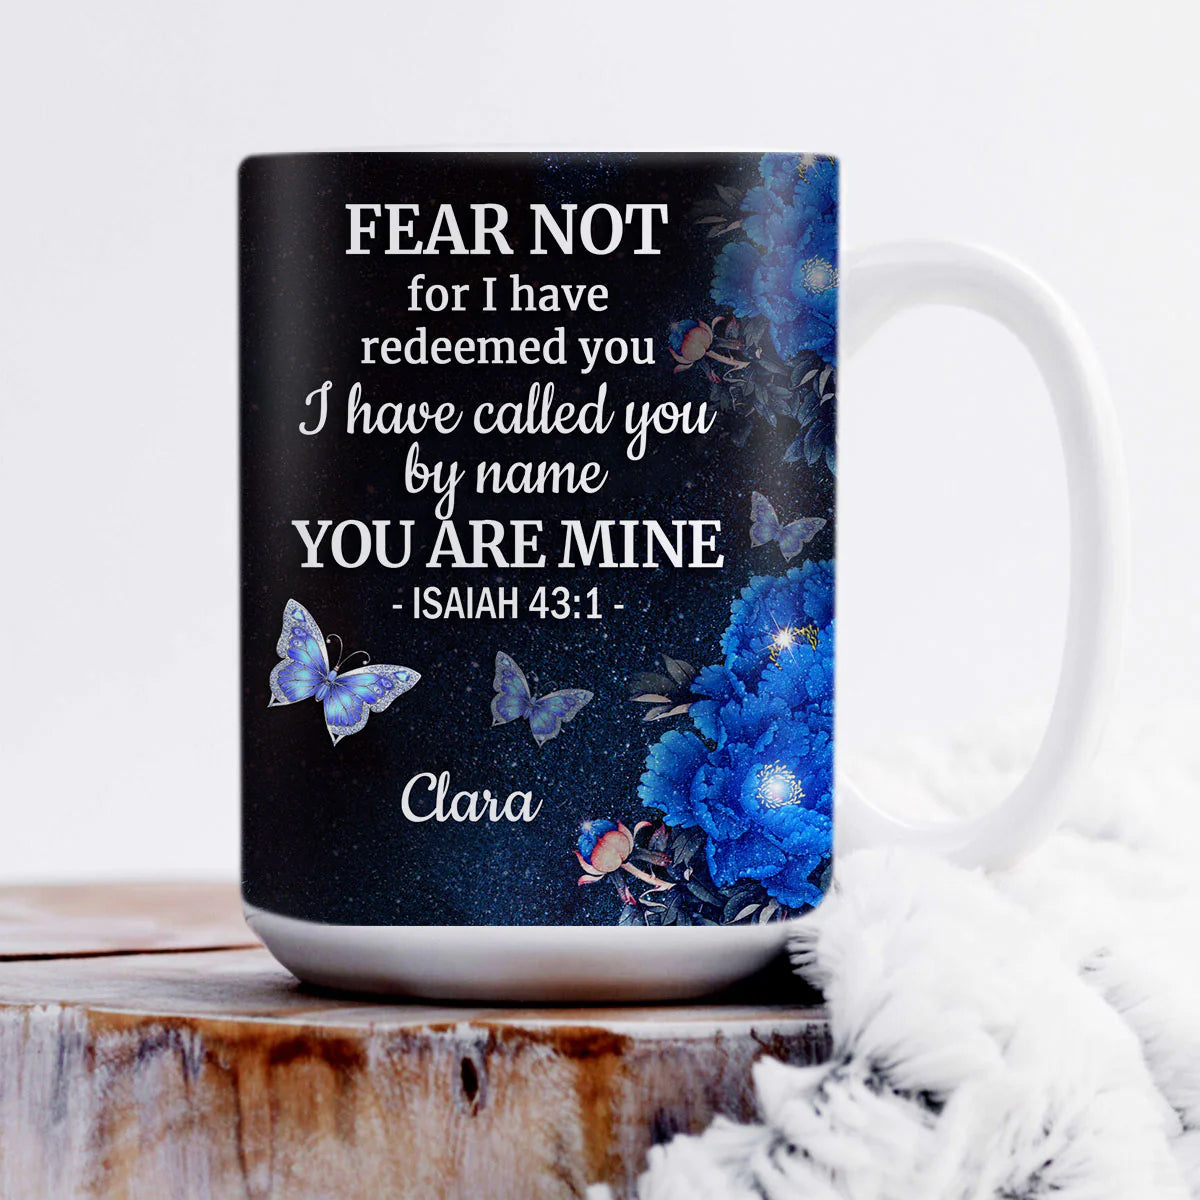 Christianartbag Drinkware, I Have Called You By Name, Personalized Mug, Tumbler, Personalized Gift. - Christian Art Bag